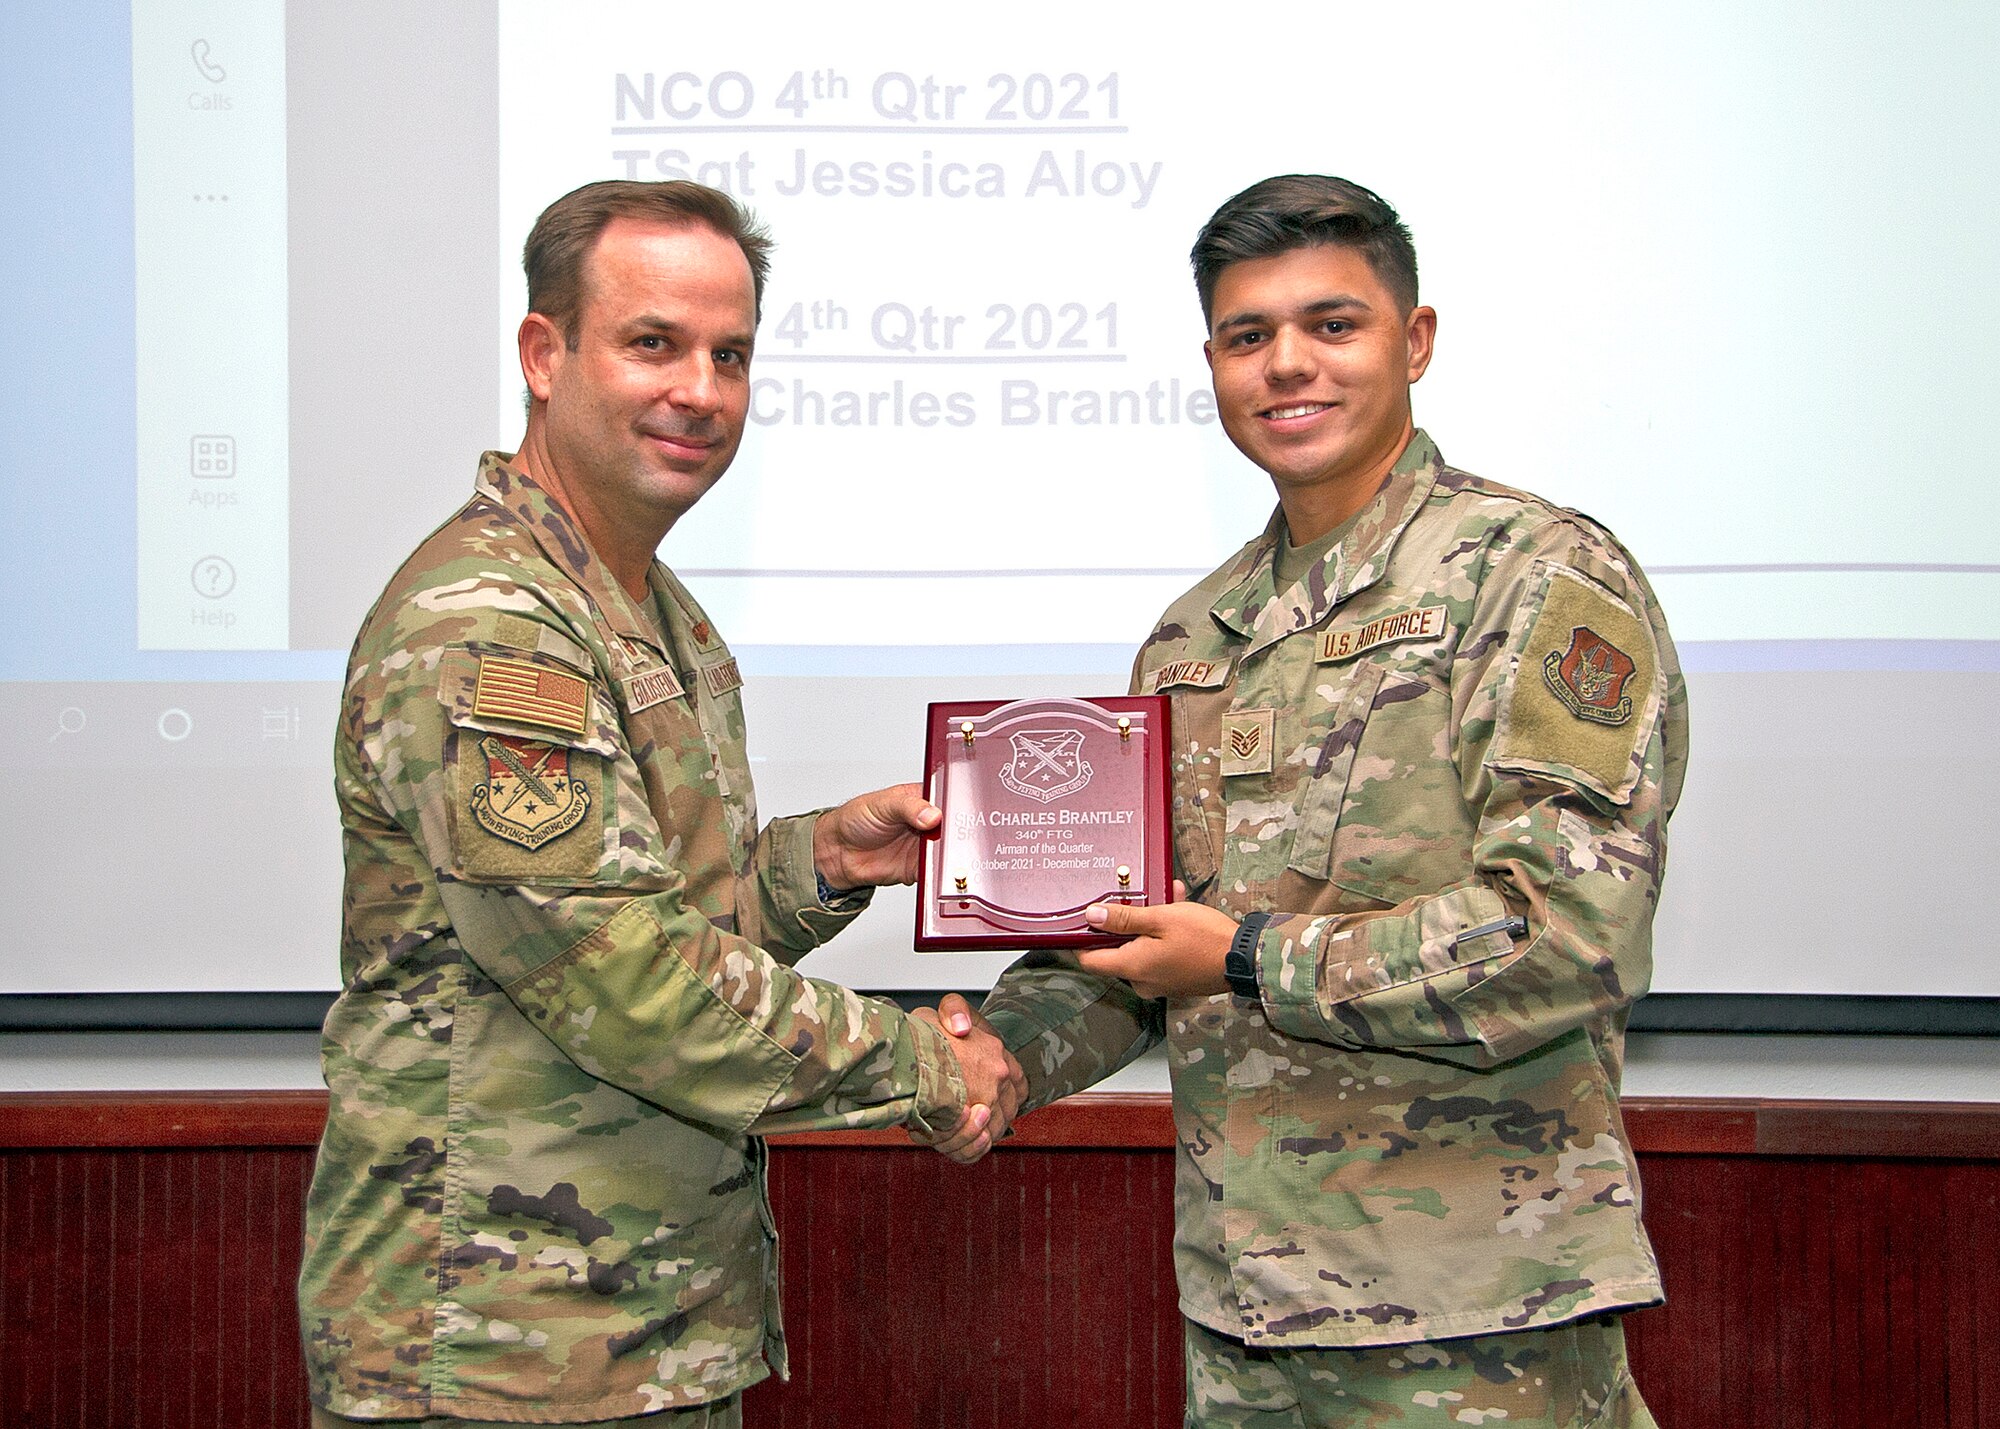 340th FTG highlights outstanding performers during fall MUTA